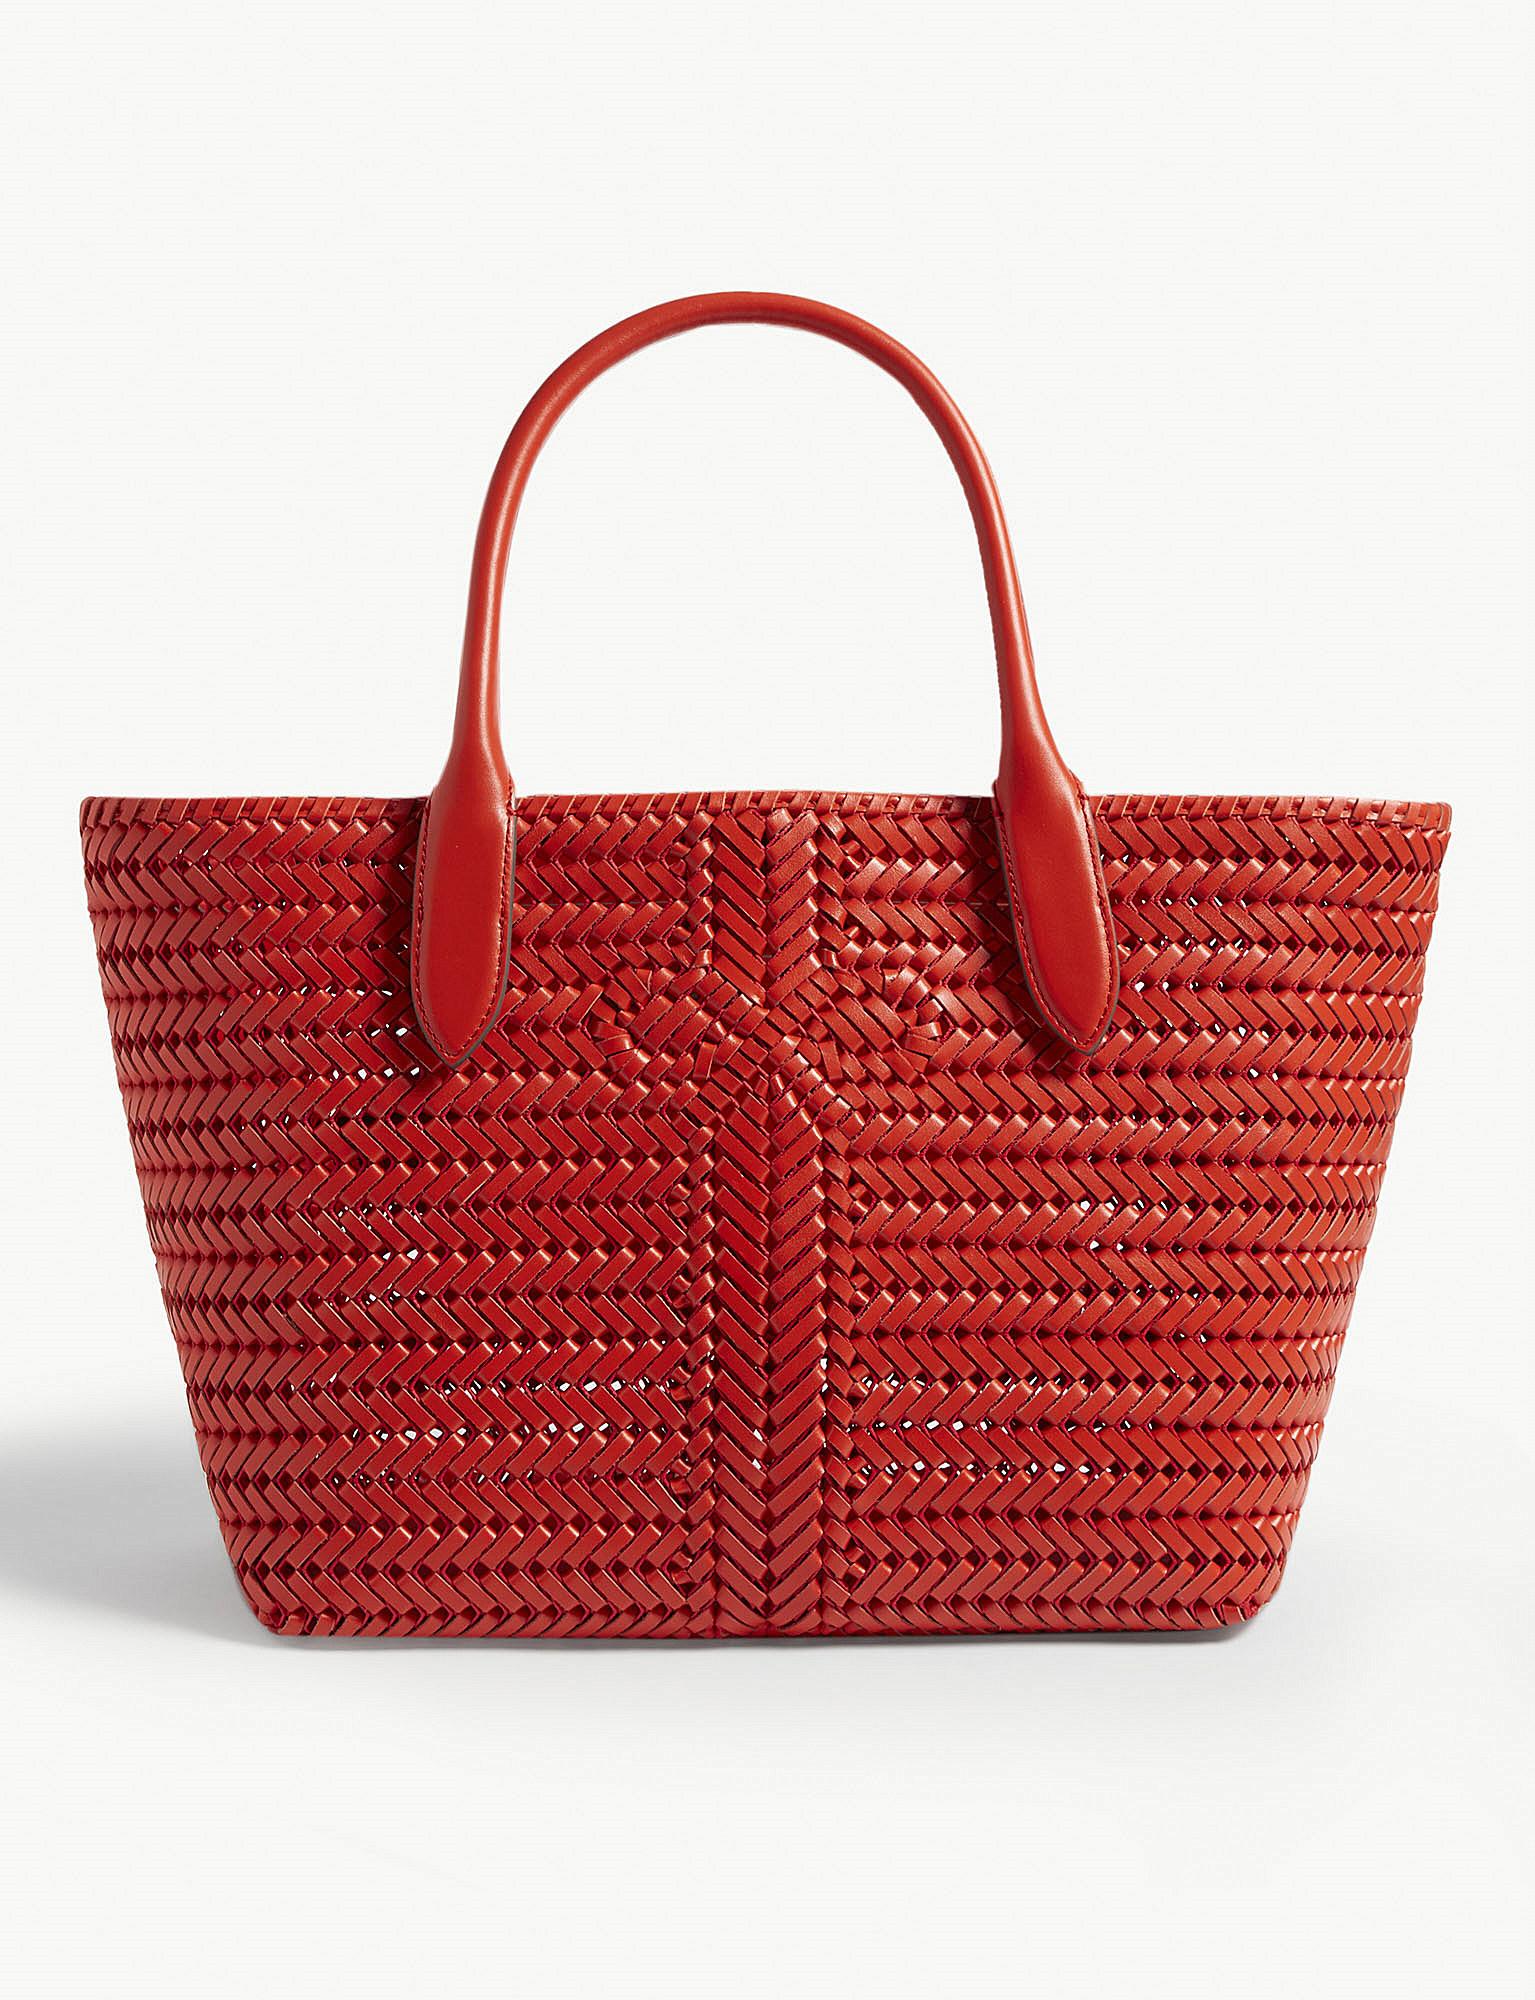 Anya Hindmarch Neeson Woven Leather Tote in Red - Lyst